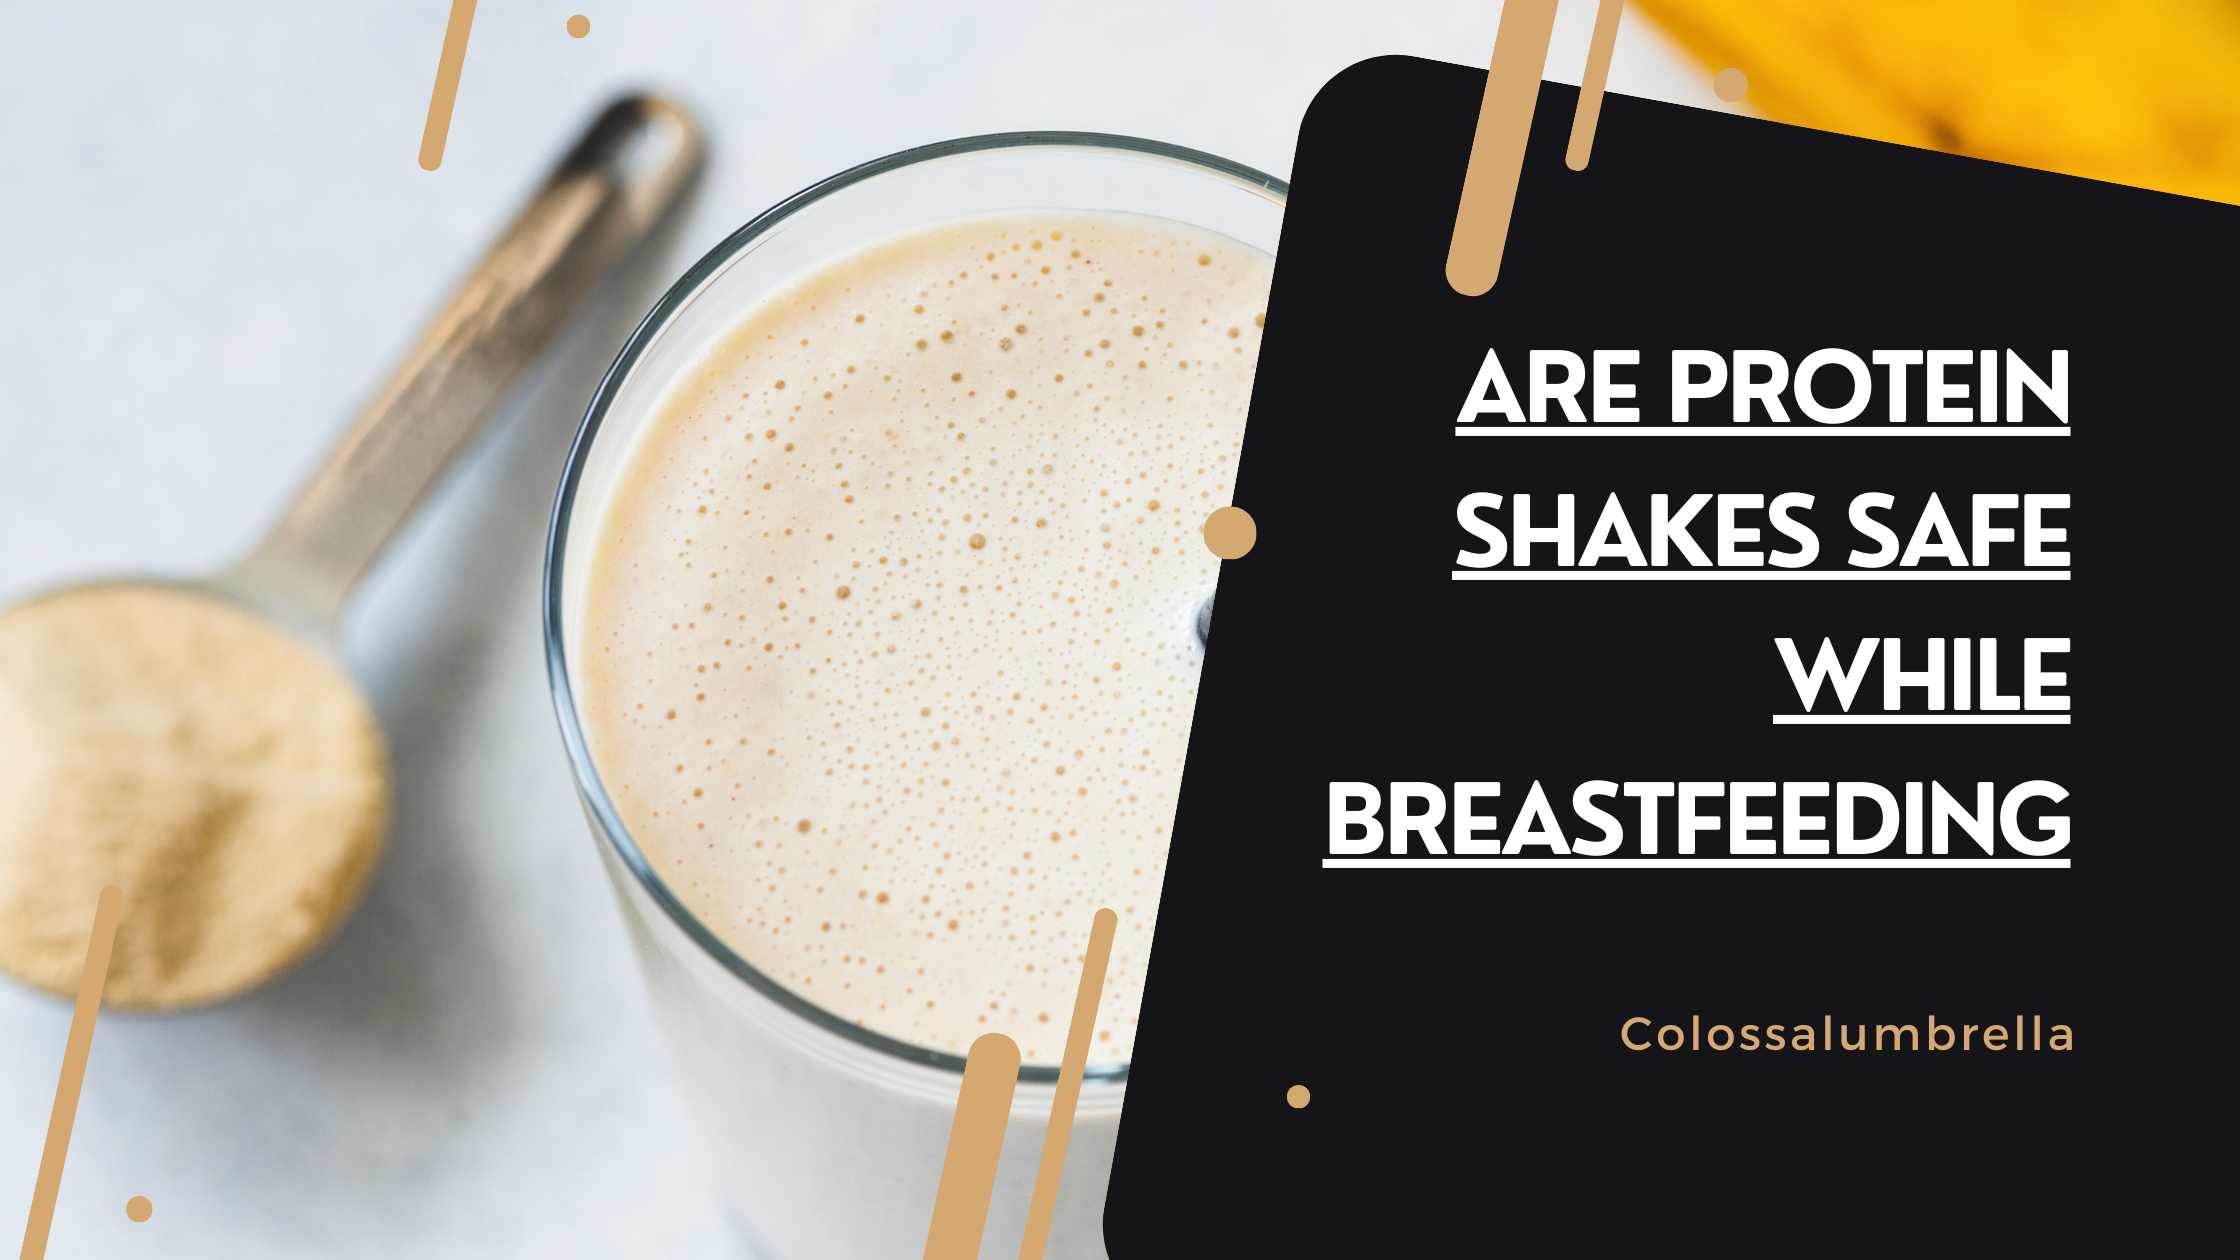 Are protein shakes safe while breastfeeding? Facts Revealed